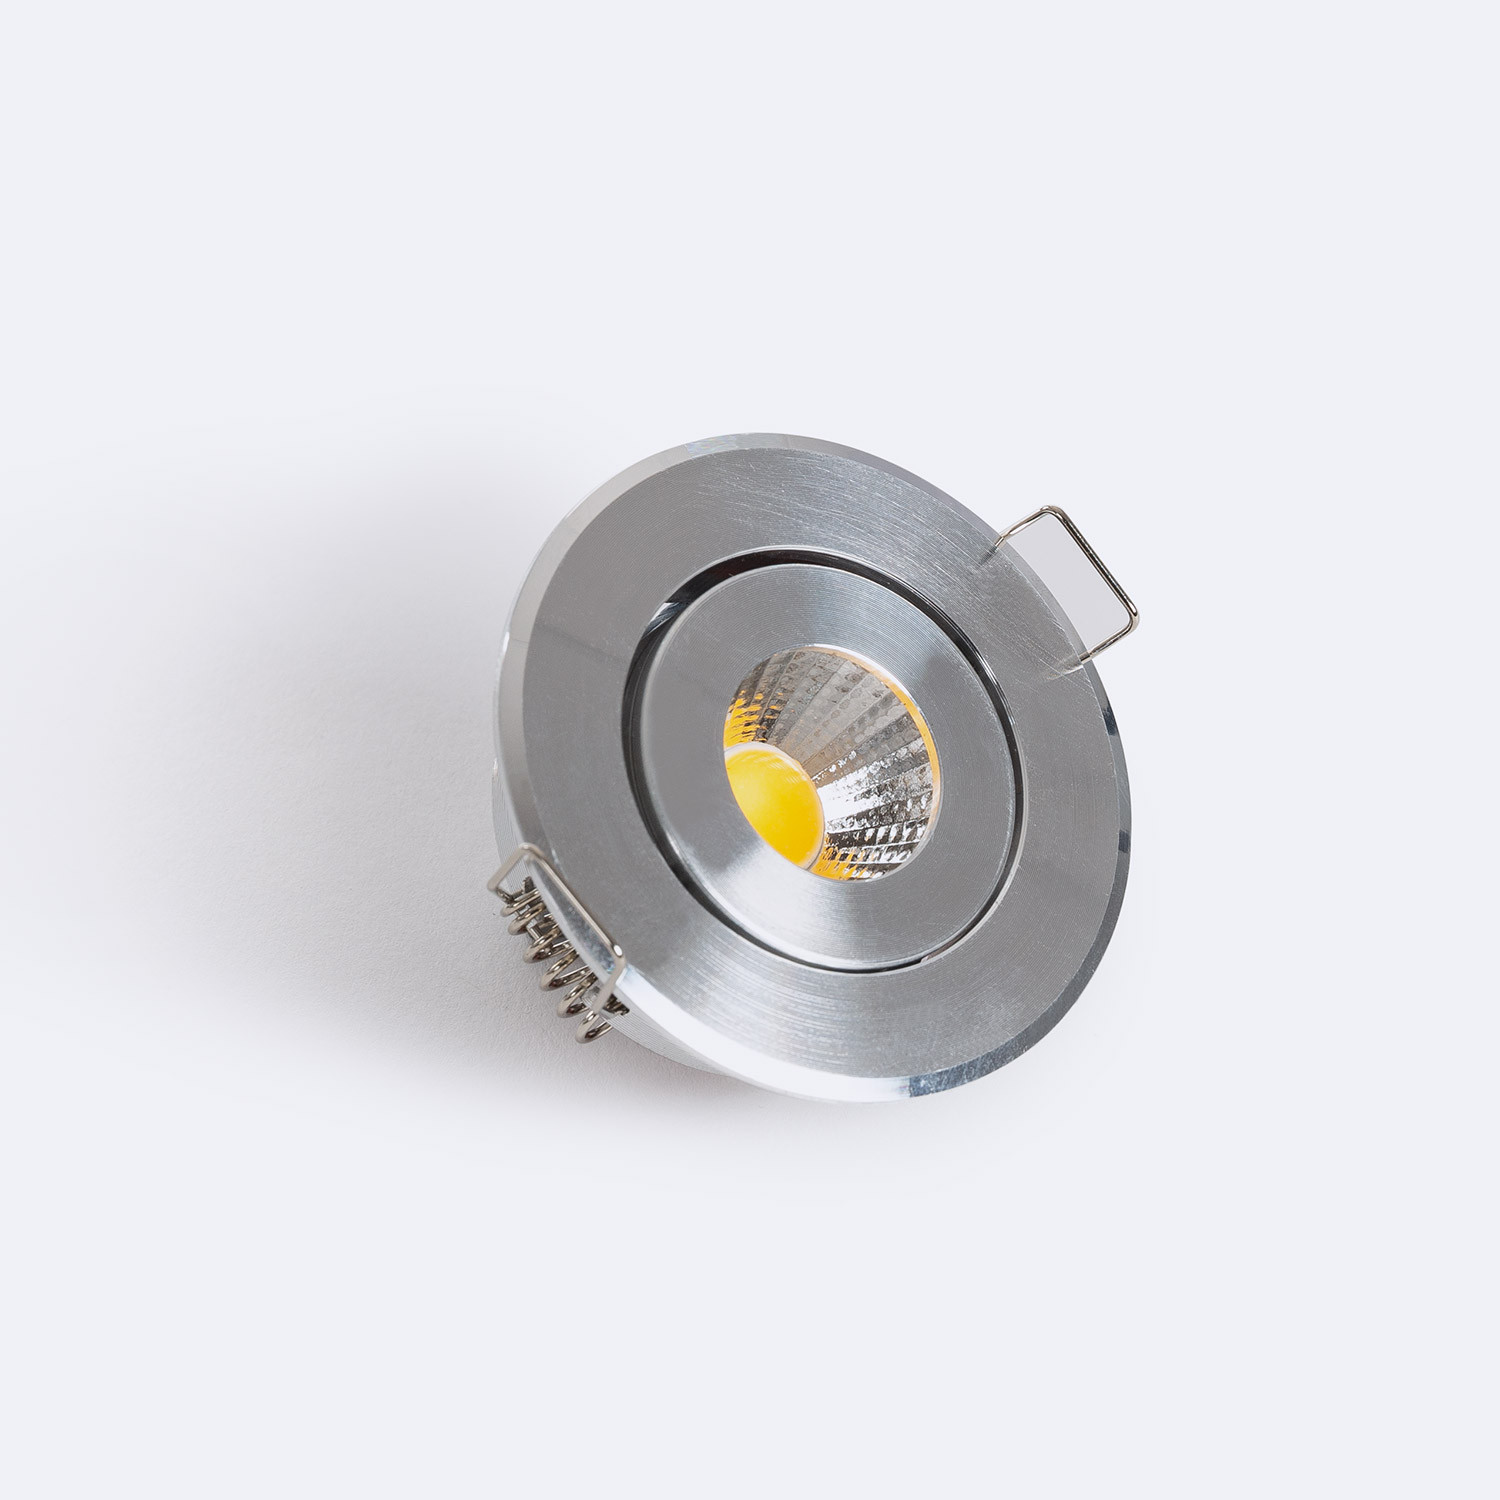 Product of Silver Round Adjustable 1W COB LED Spotlight Ø45 mm Cut-Out